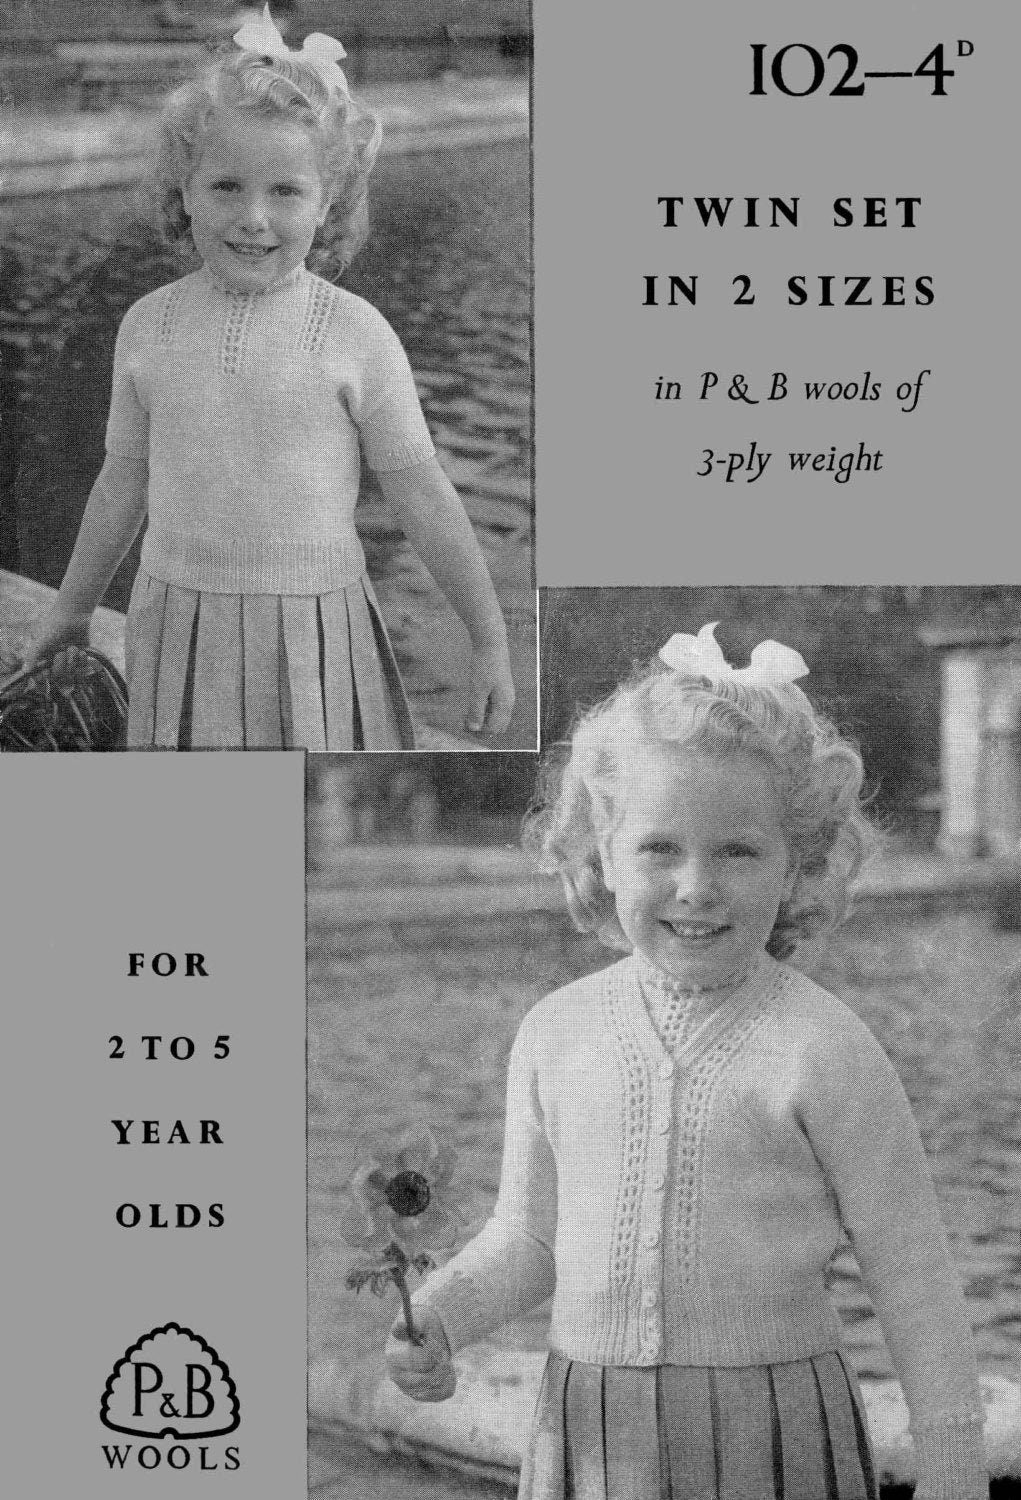 Girls Twin Set, Cardigan and Jumper for 2 to 5 Year, 3ply, 50s Knitting Pattern, P&B 102